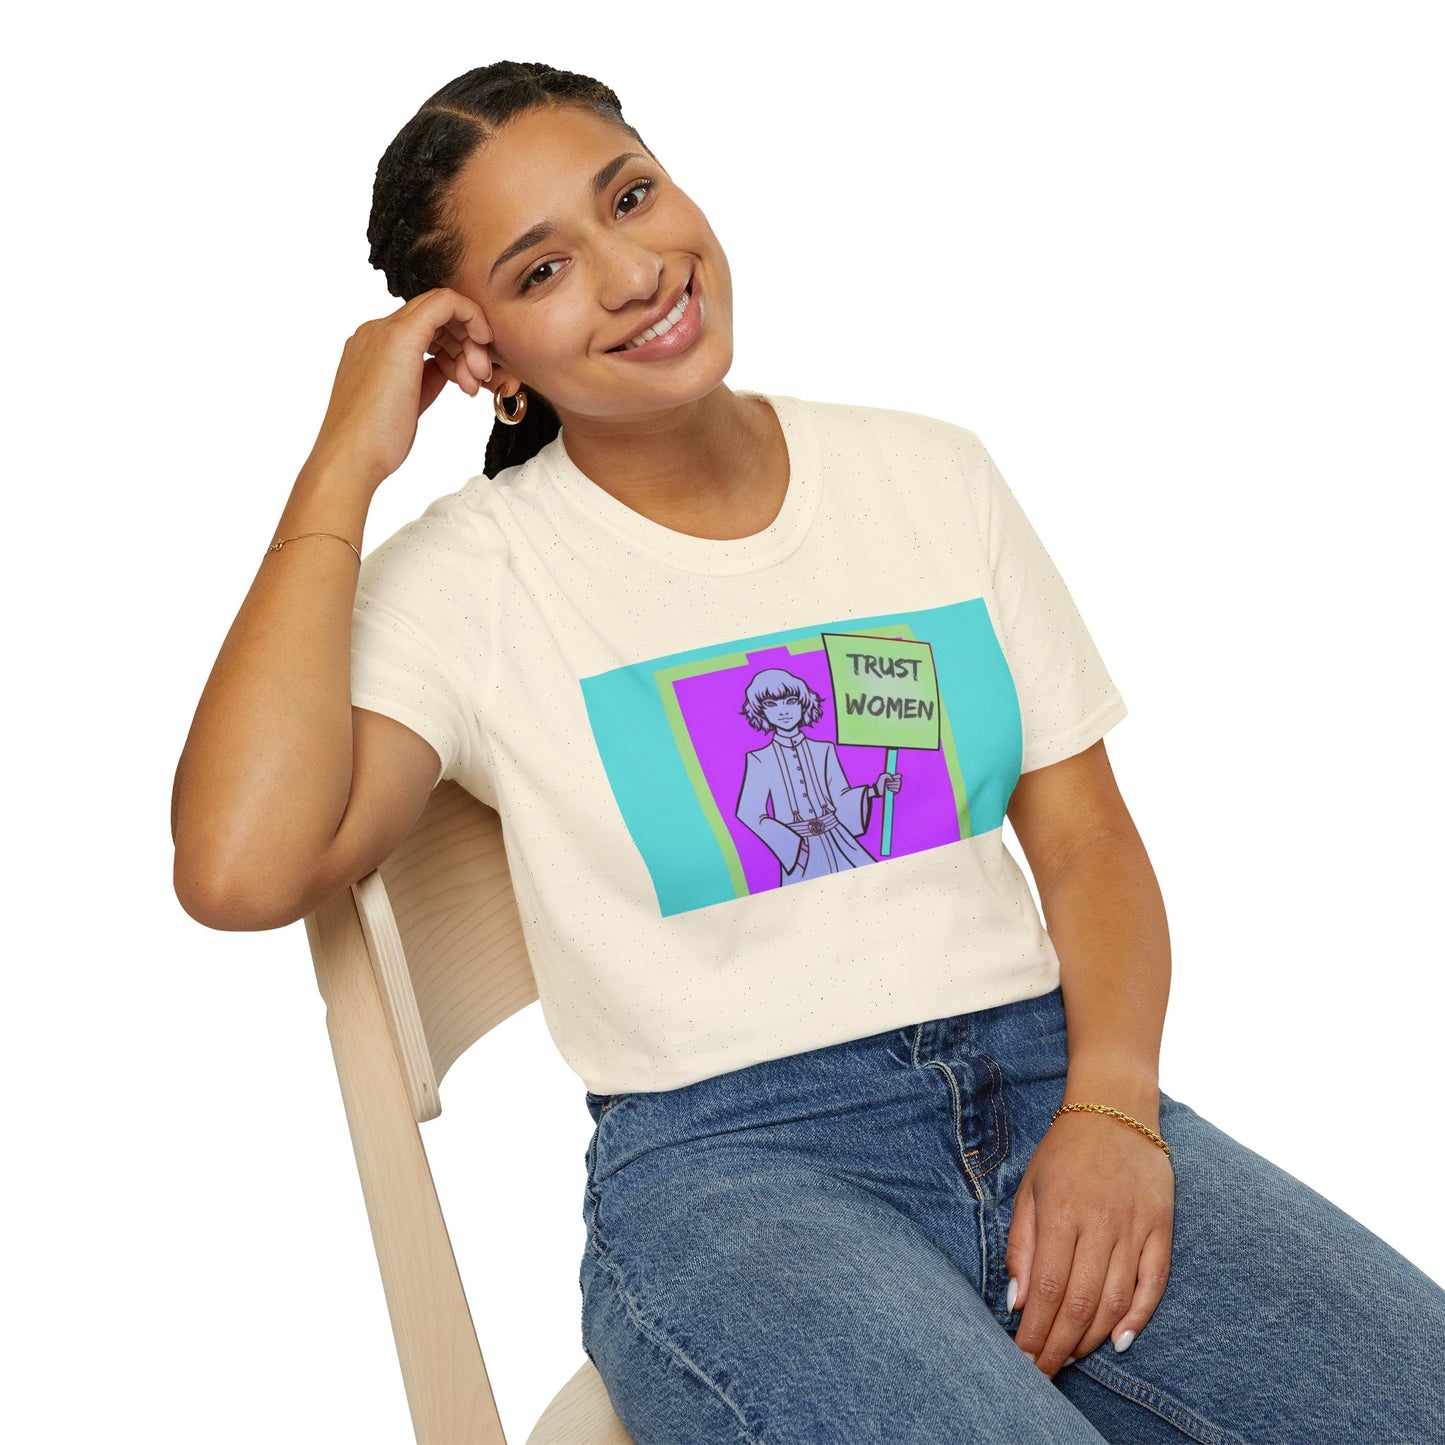 Trust Women! Bold Uncompromising Statement Soft Style t-shirt |unisex| Protest, Demand Equality Now! Activism! Look Good!